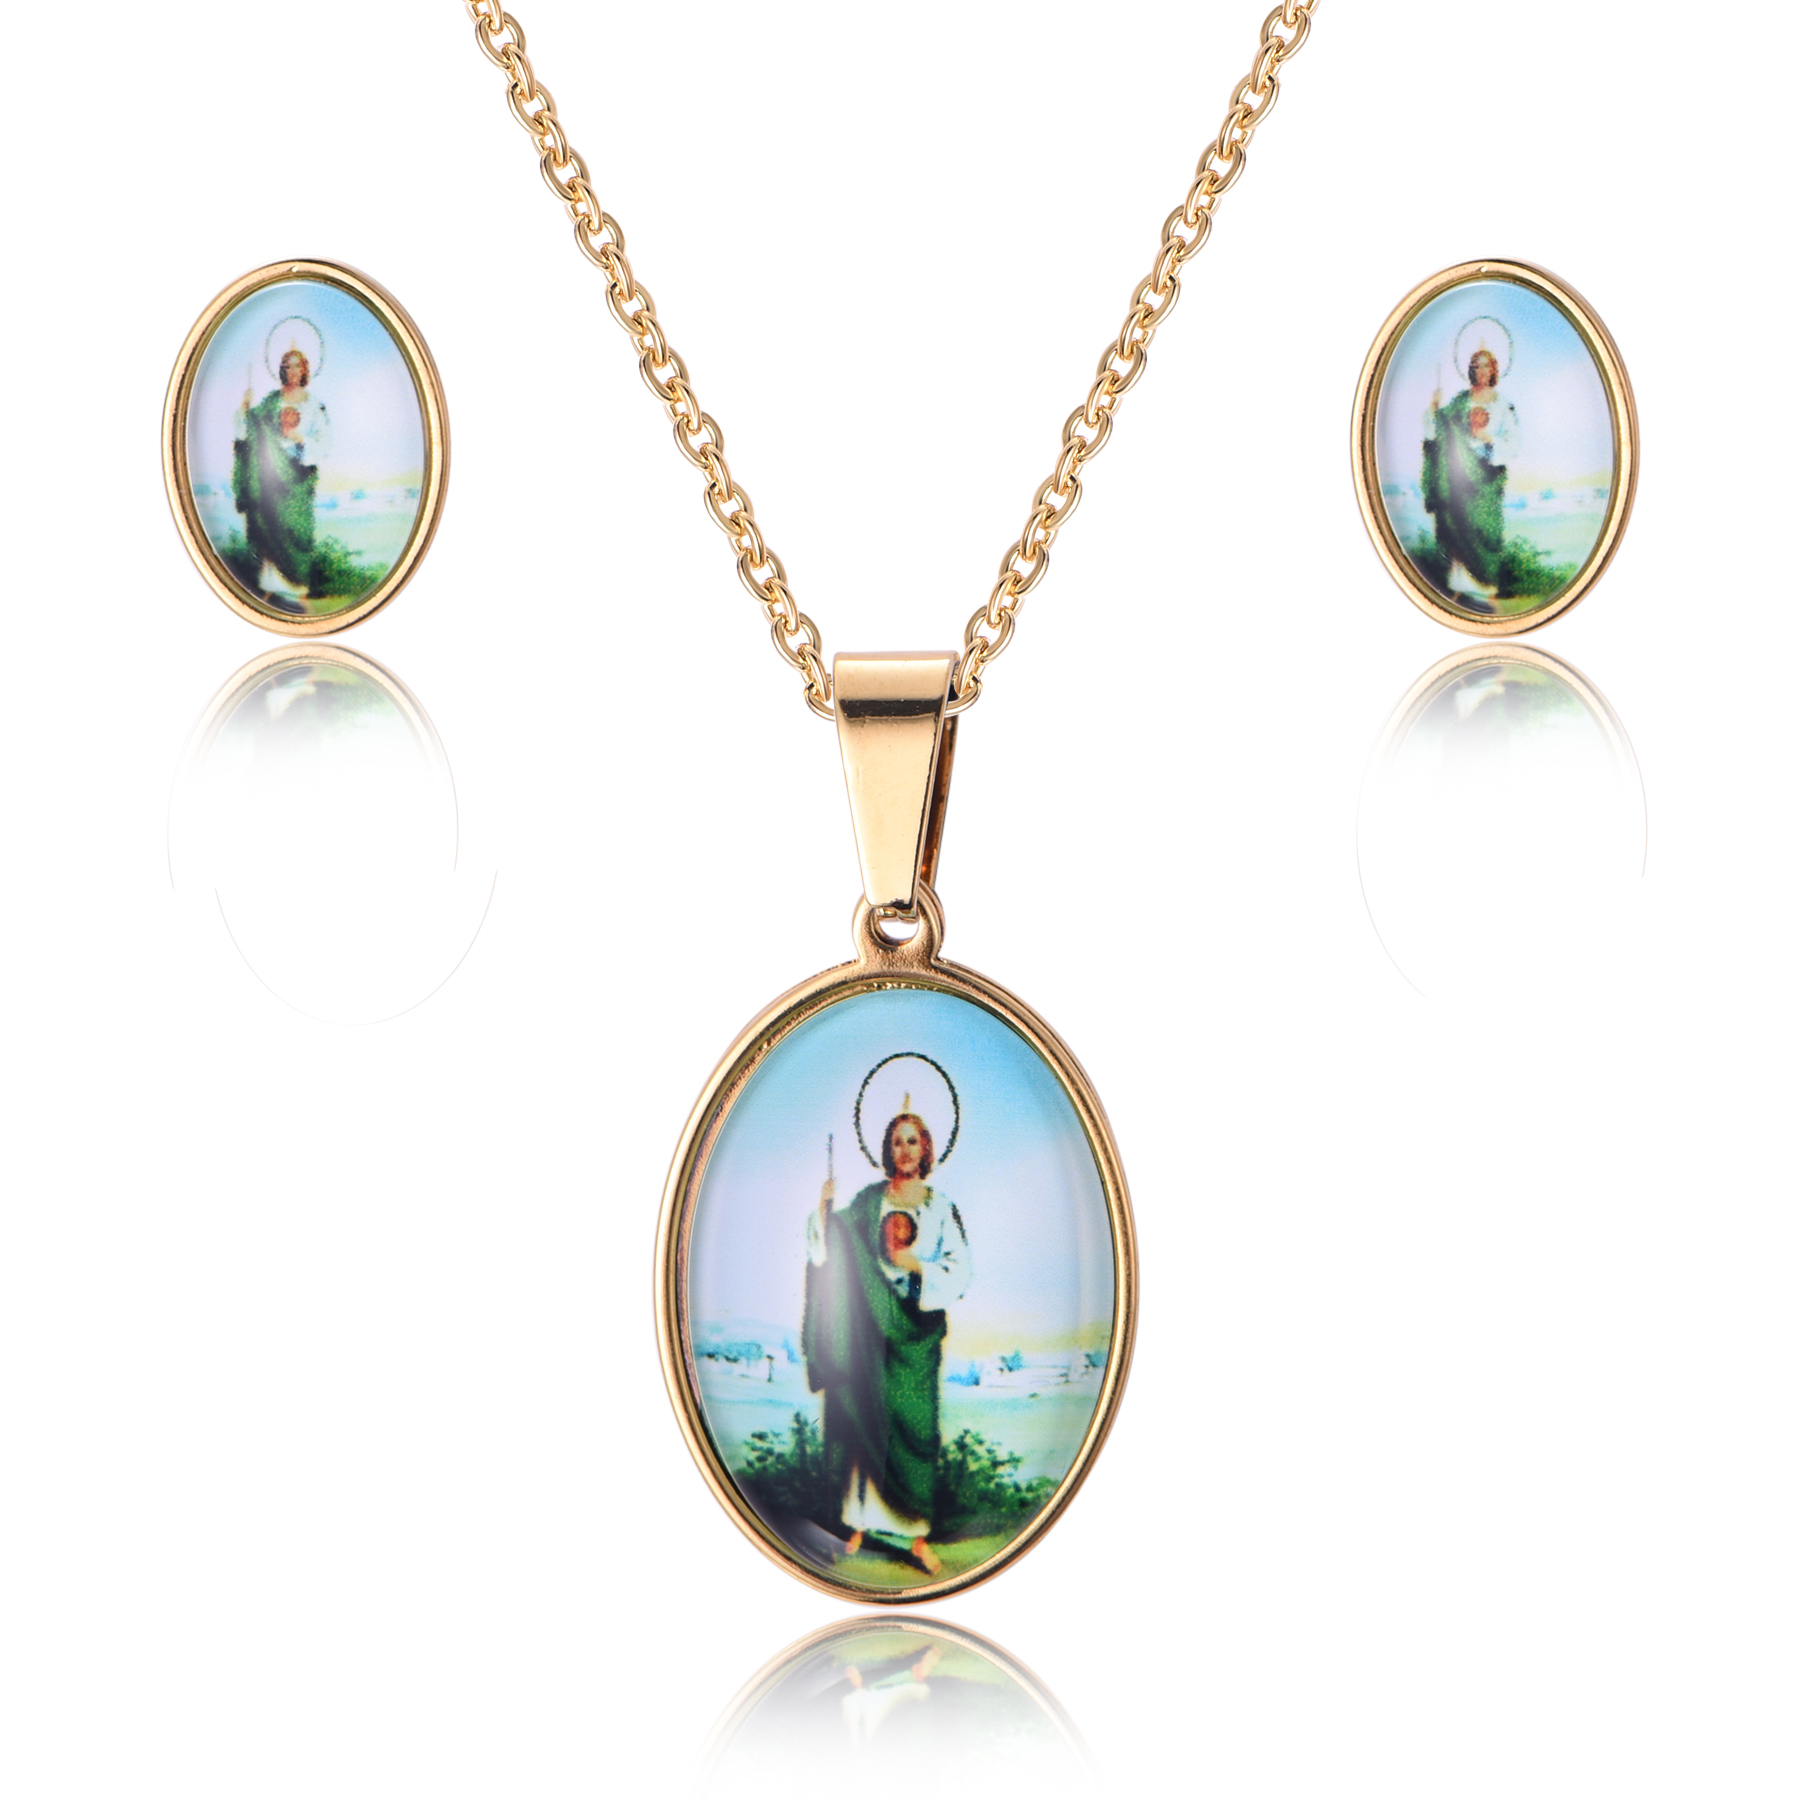 18K Gold Stainless Steel Jesus Christ Religious Pendant Necklace Epoxy Pictures Jewelry Set SJ-03